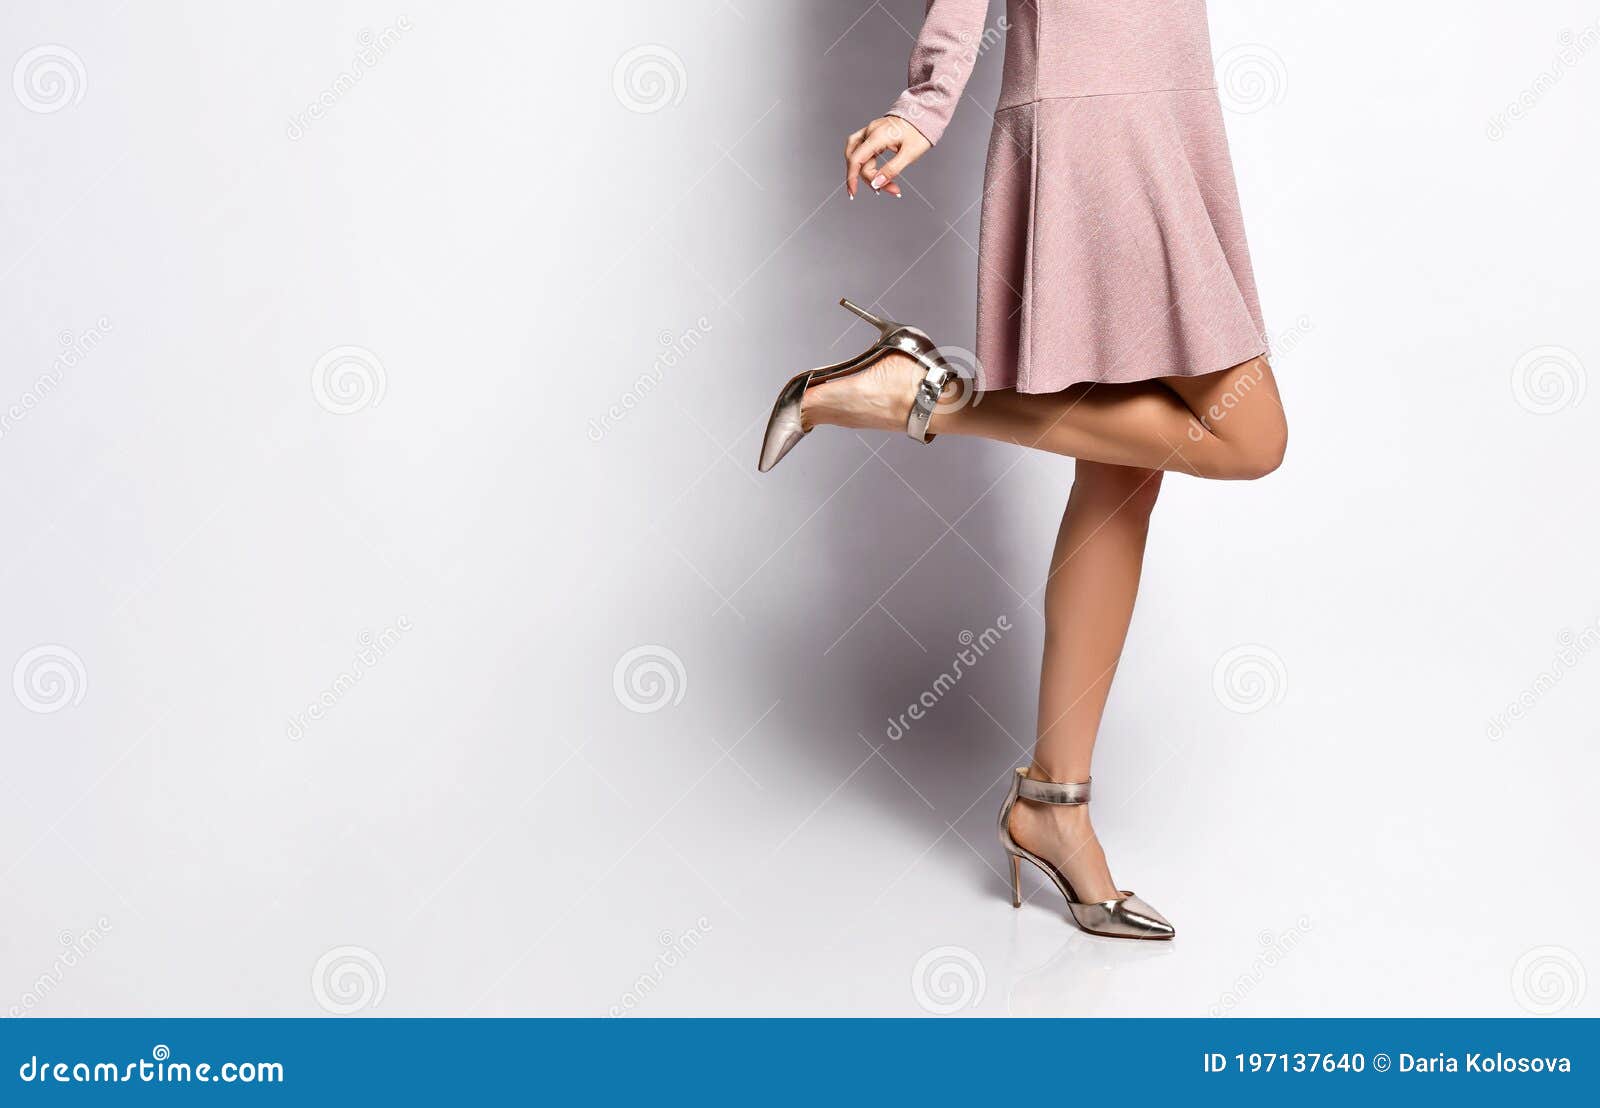 Long Woman Legs On White Pink Gumshoes On Side View Stock Photo